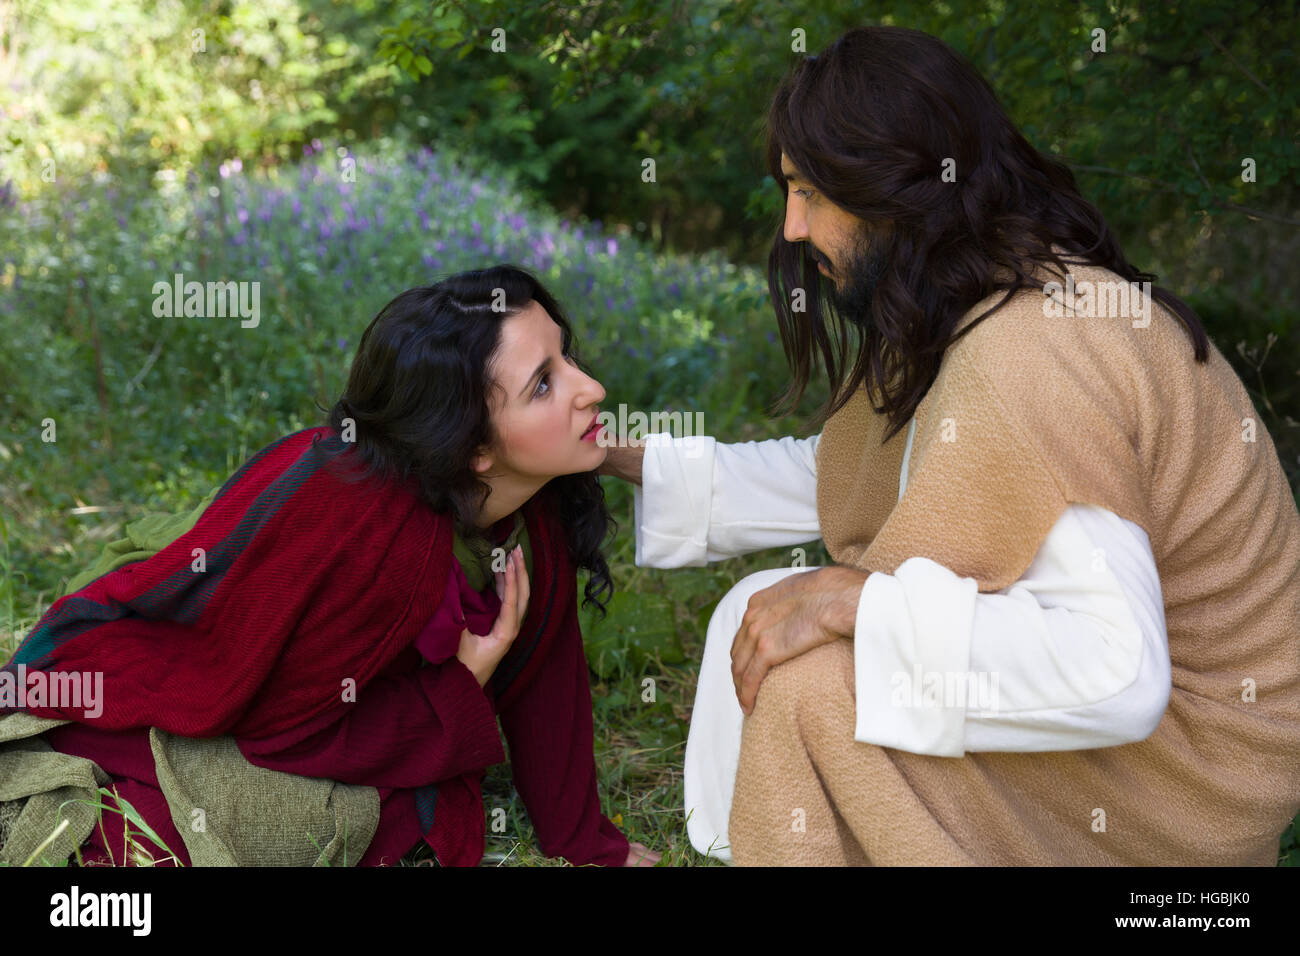 Repentant sinner woman touching the robe of Jesus, asking for forgiveness and healing Stock Photo